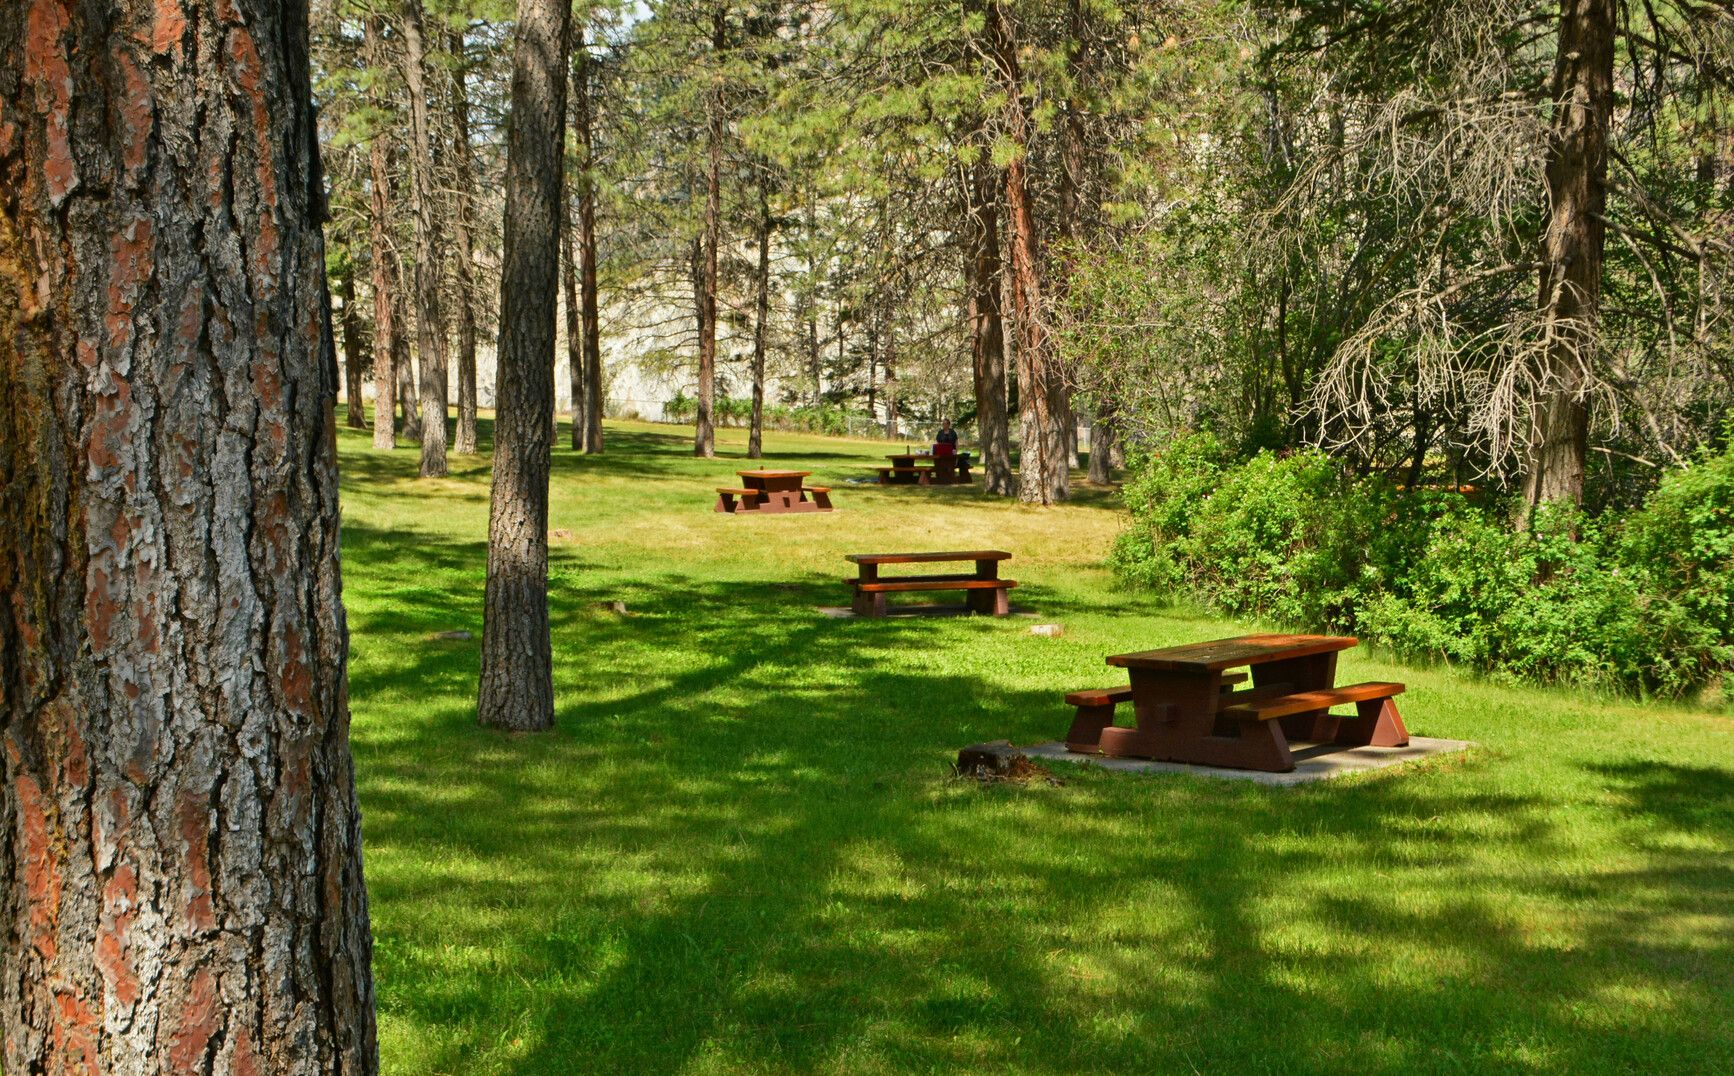 Picnic tables in the day-use area of Skihist Park.